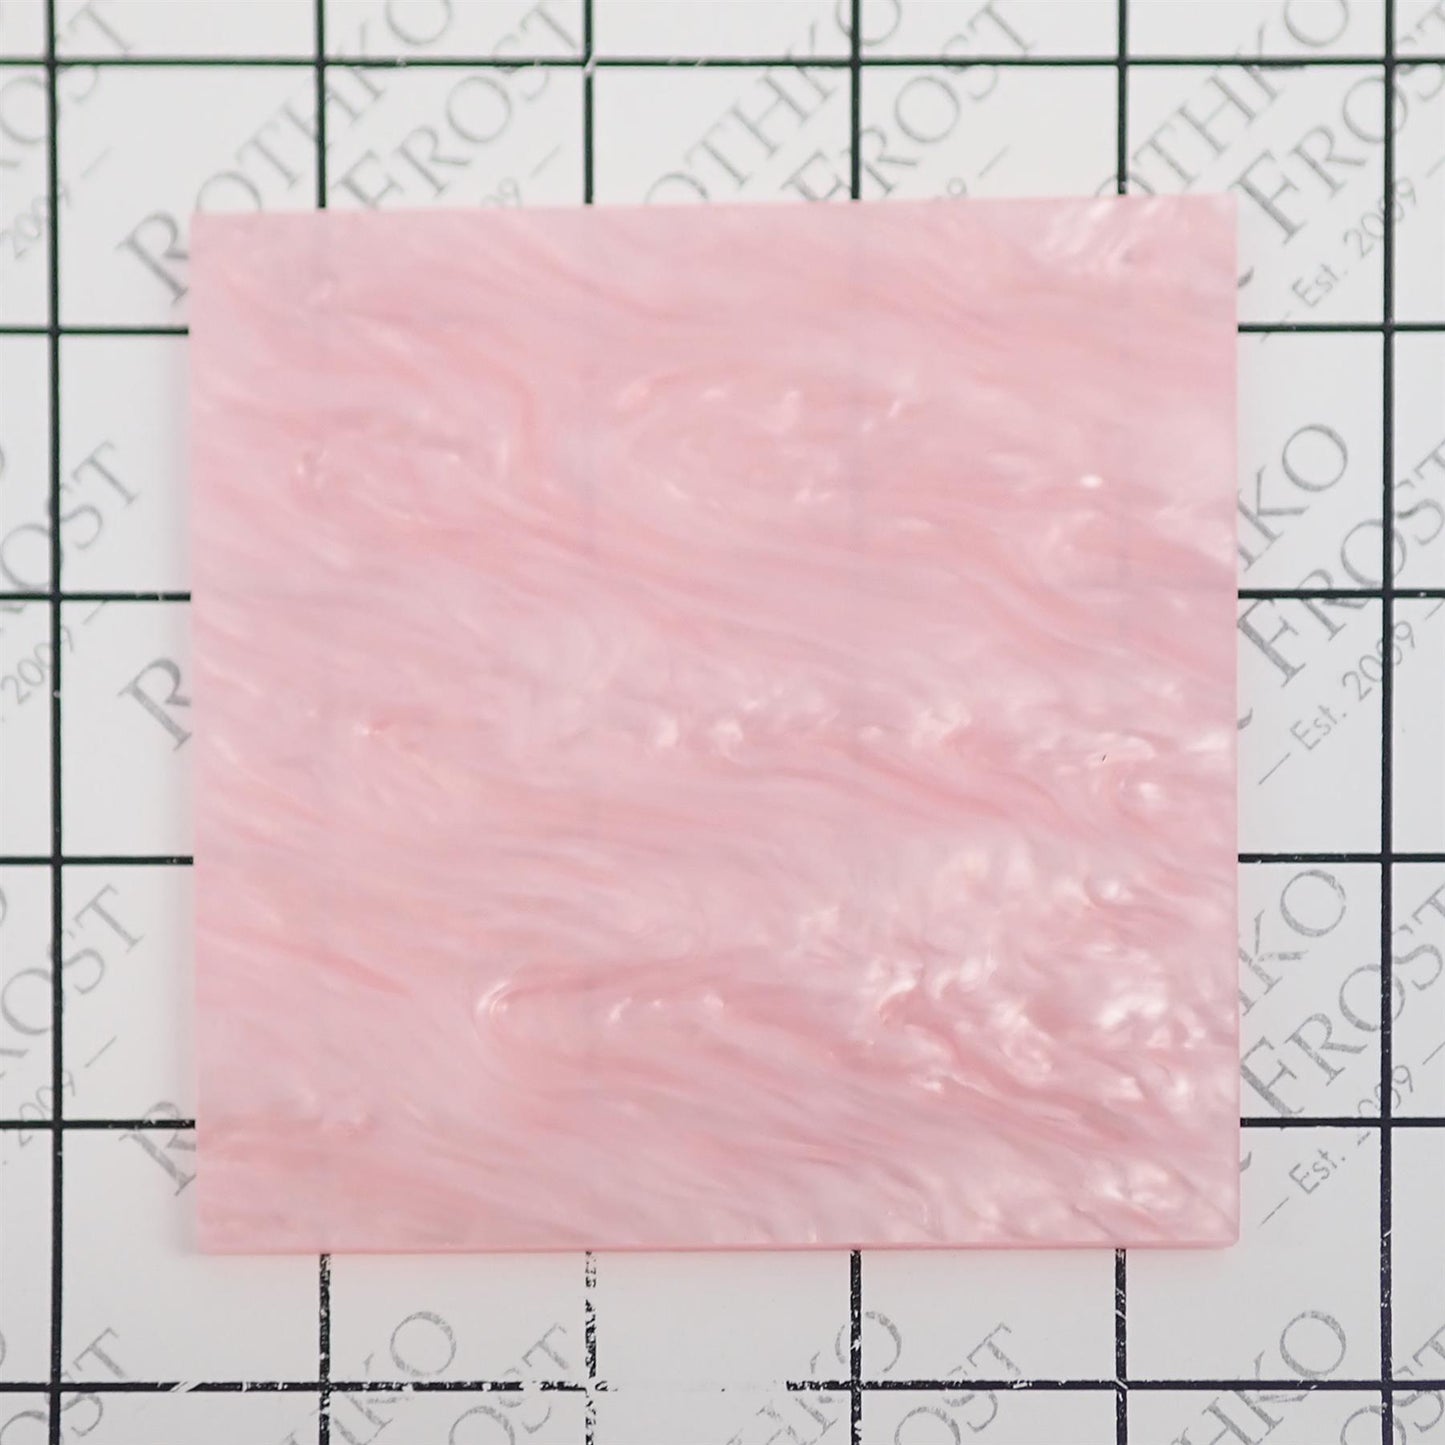 Incudo Baby Pink Pearl Acrylic Sheet - 150x125x3mm